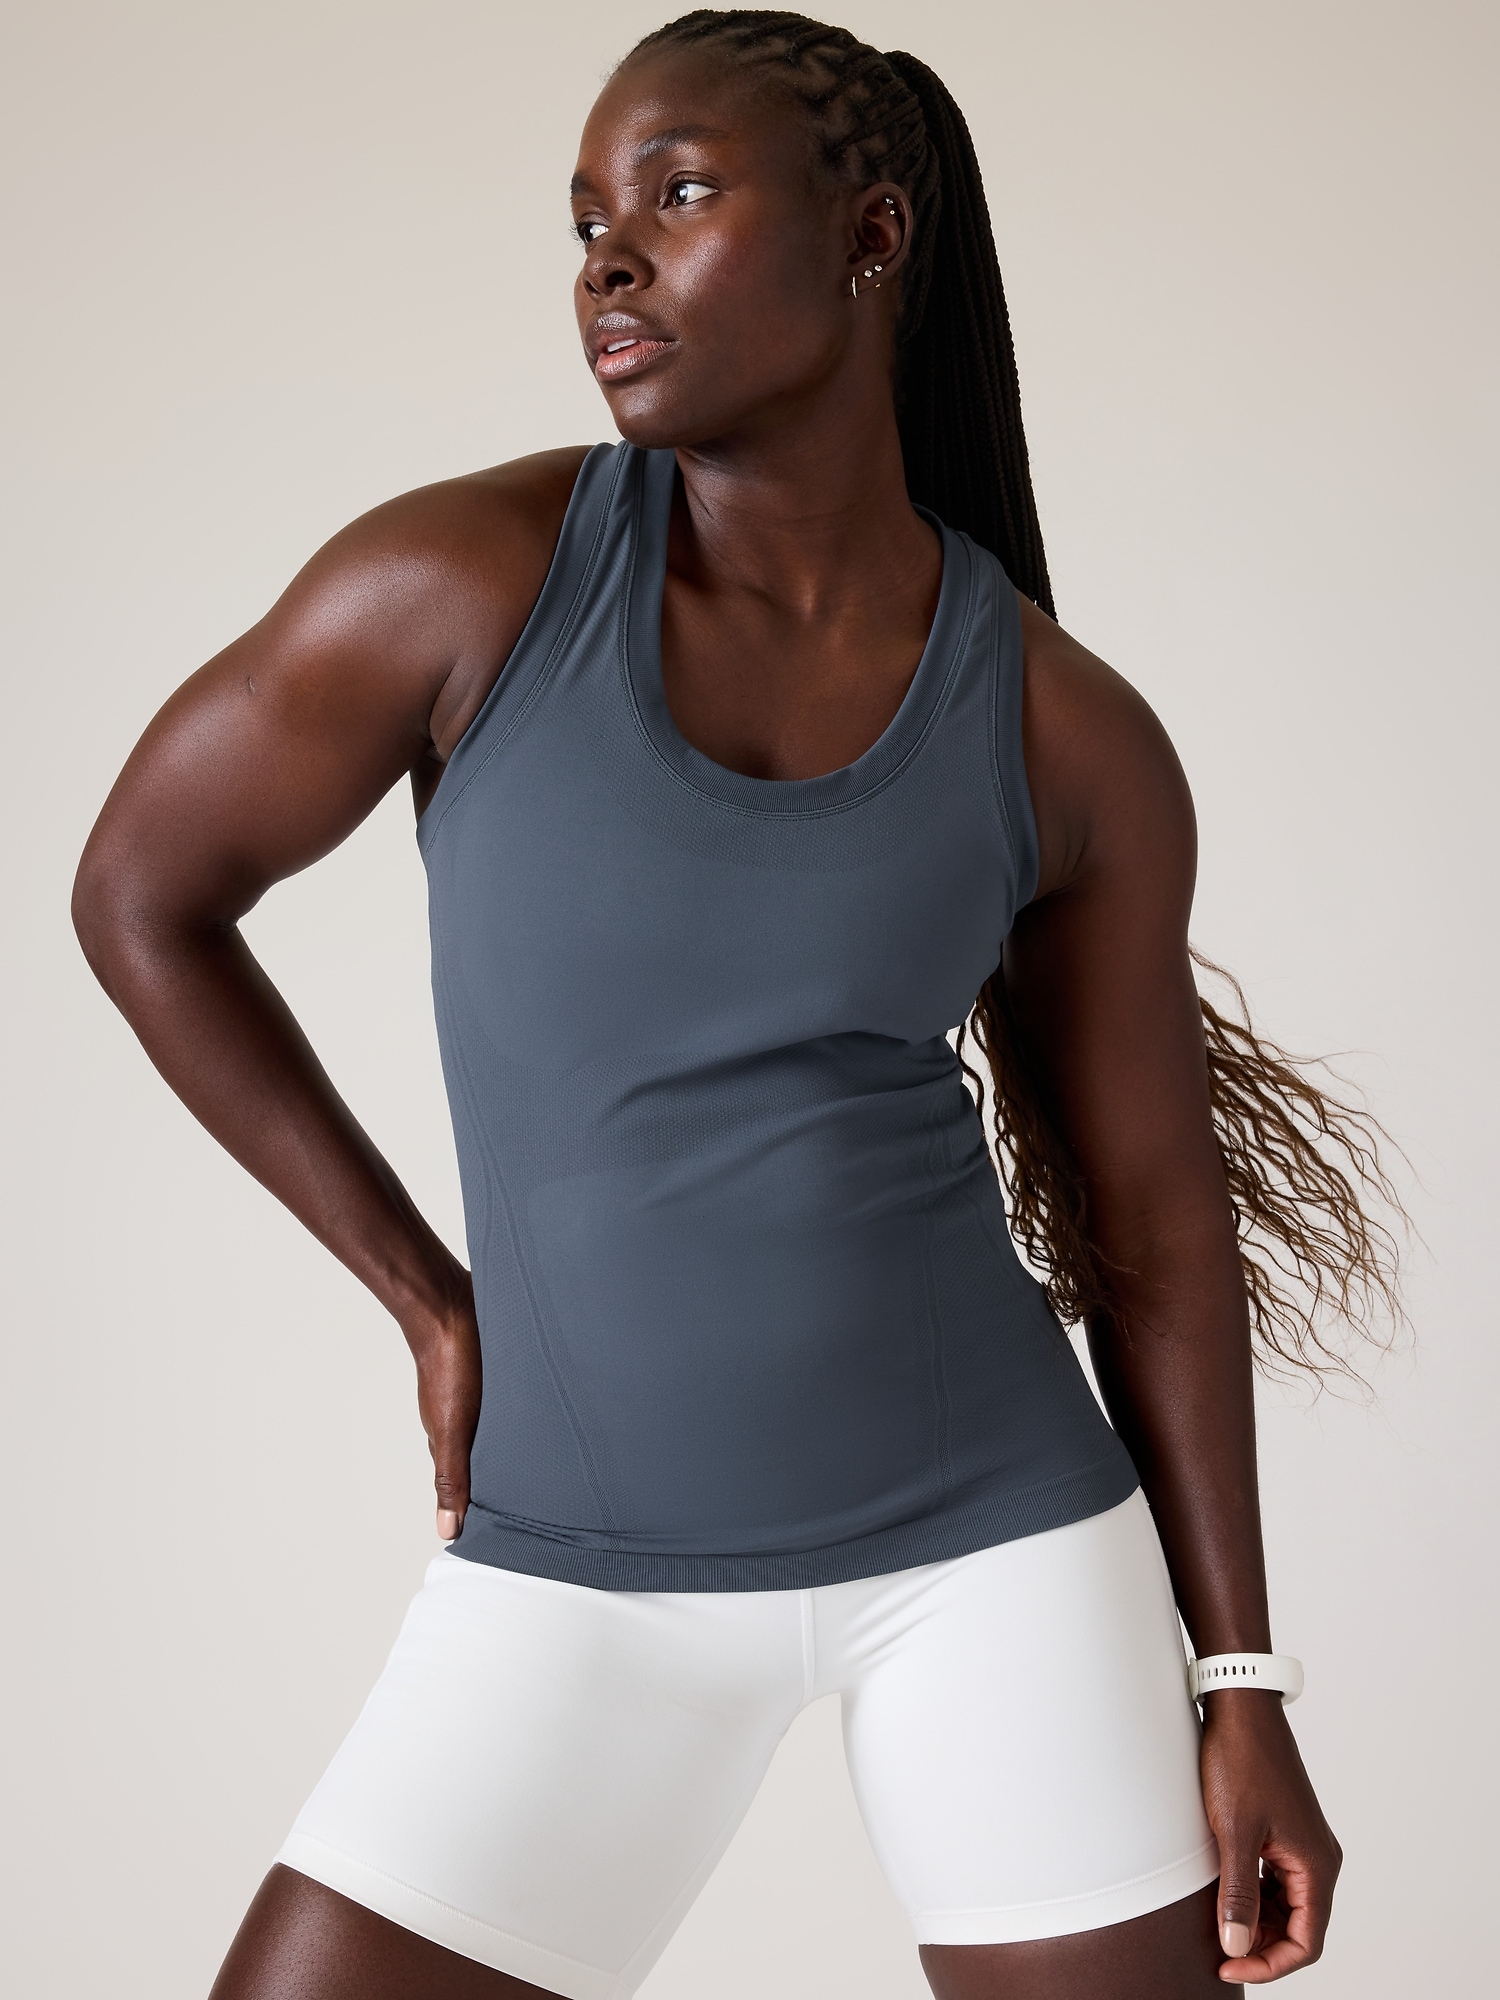 Fit Review Friday! Athleta In Motion Seamless Tank, Effortless Tank and  Semi-Annual Sale Starts Today!